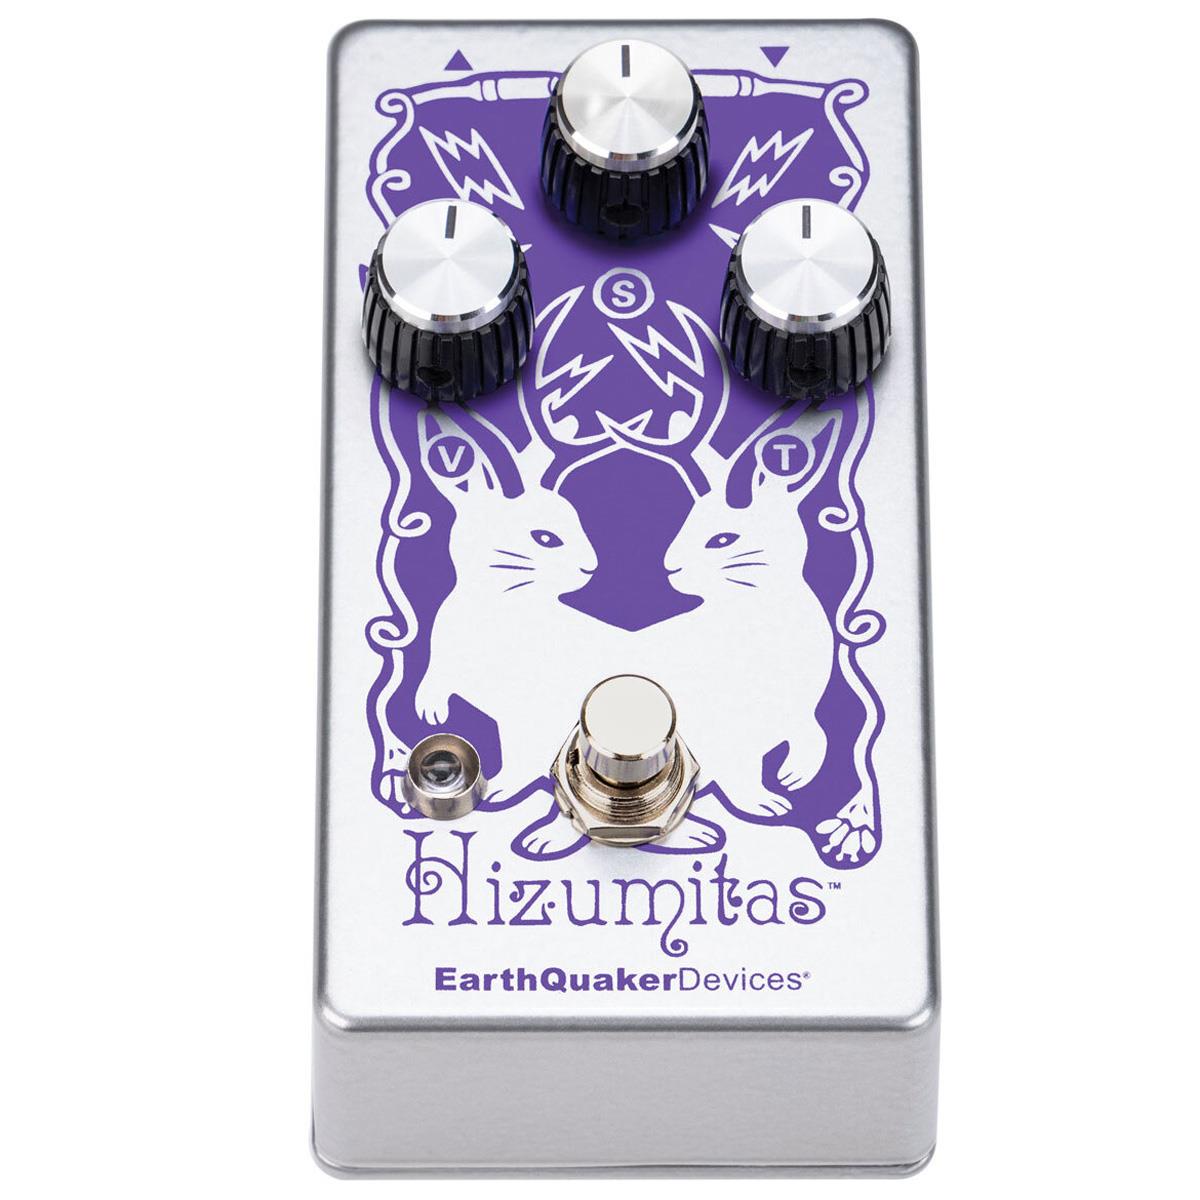 Image of Earthquaker Devices EarthQuaker Devices Hizumitas Fuzz Sustainar Pedal